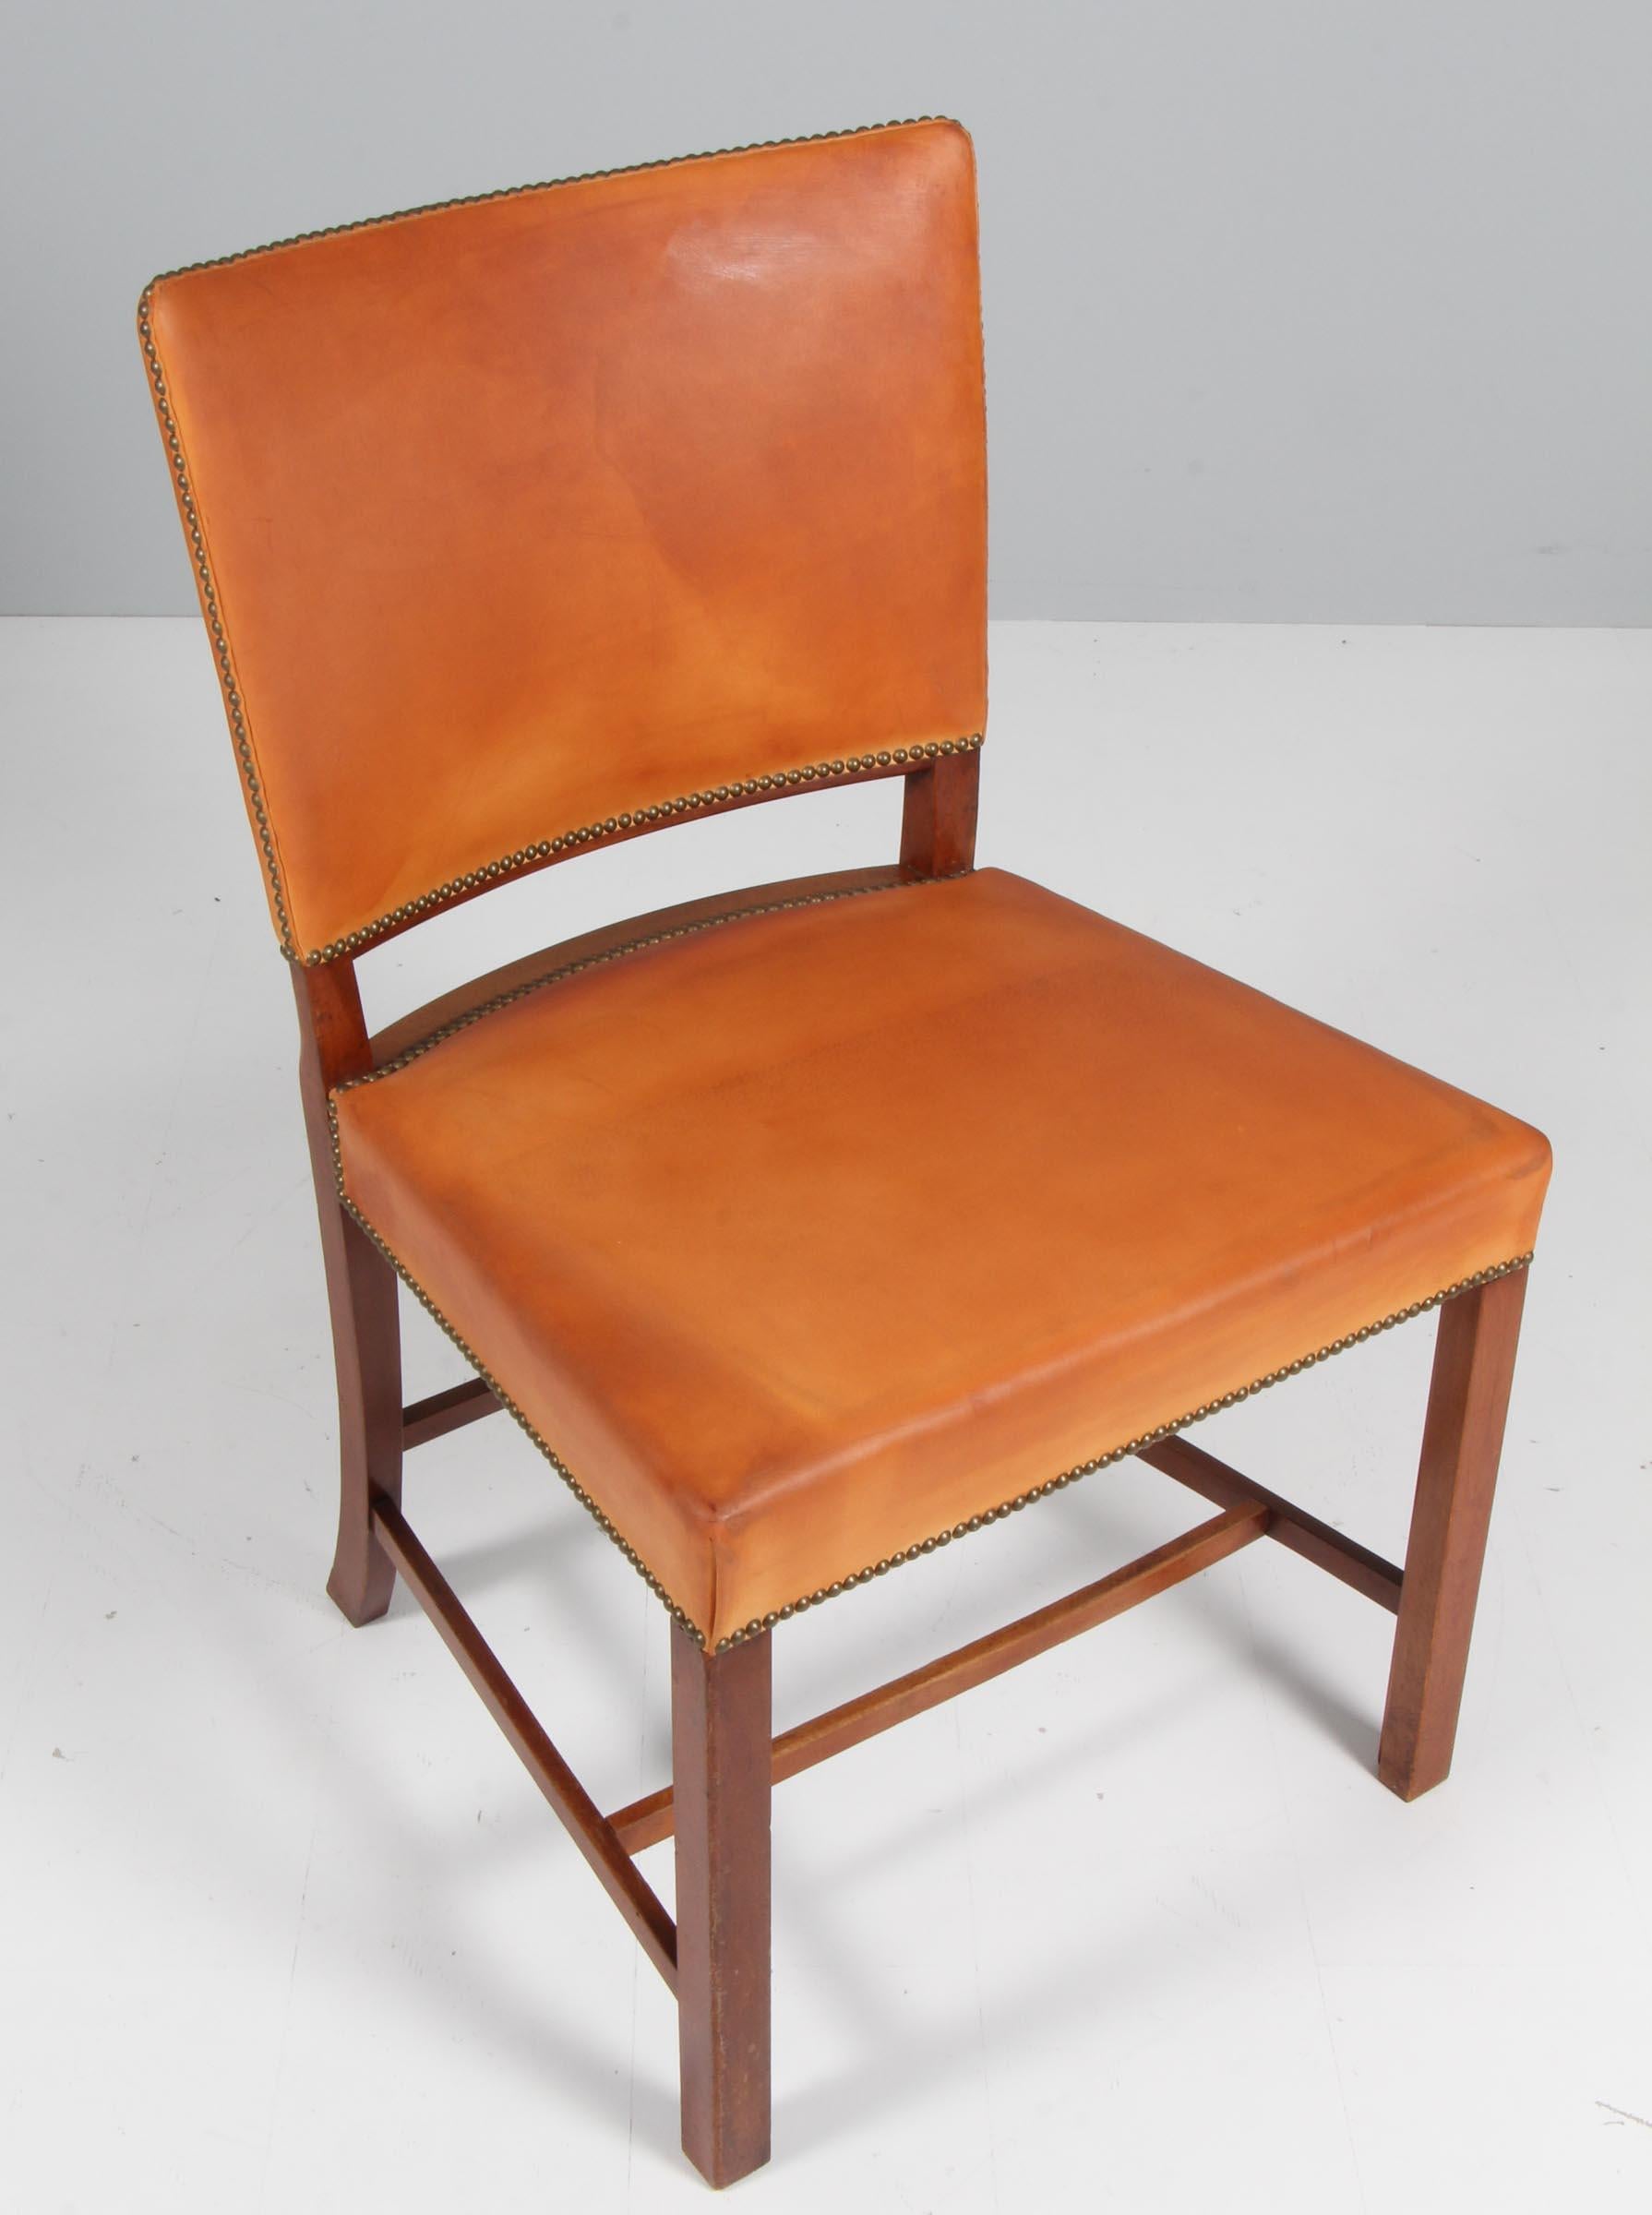 Fritz Hansen & Ivan Schlechter side chair with frame of stained beech. Original upholstered with patinated nature leather with brass nails.

Made in the 1940s.